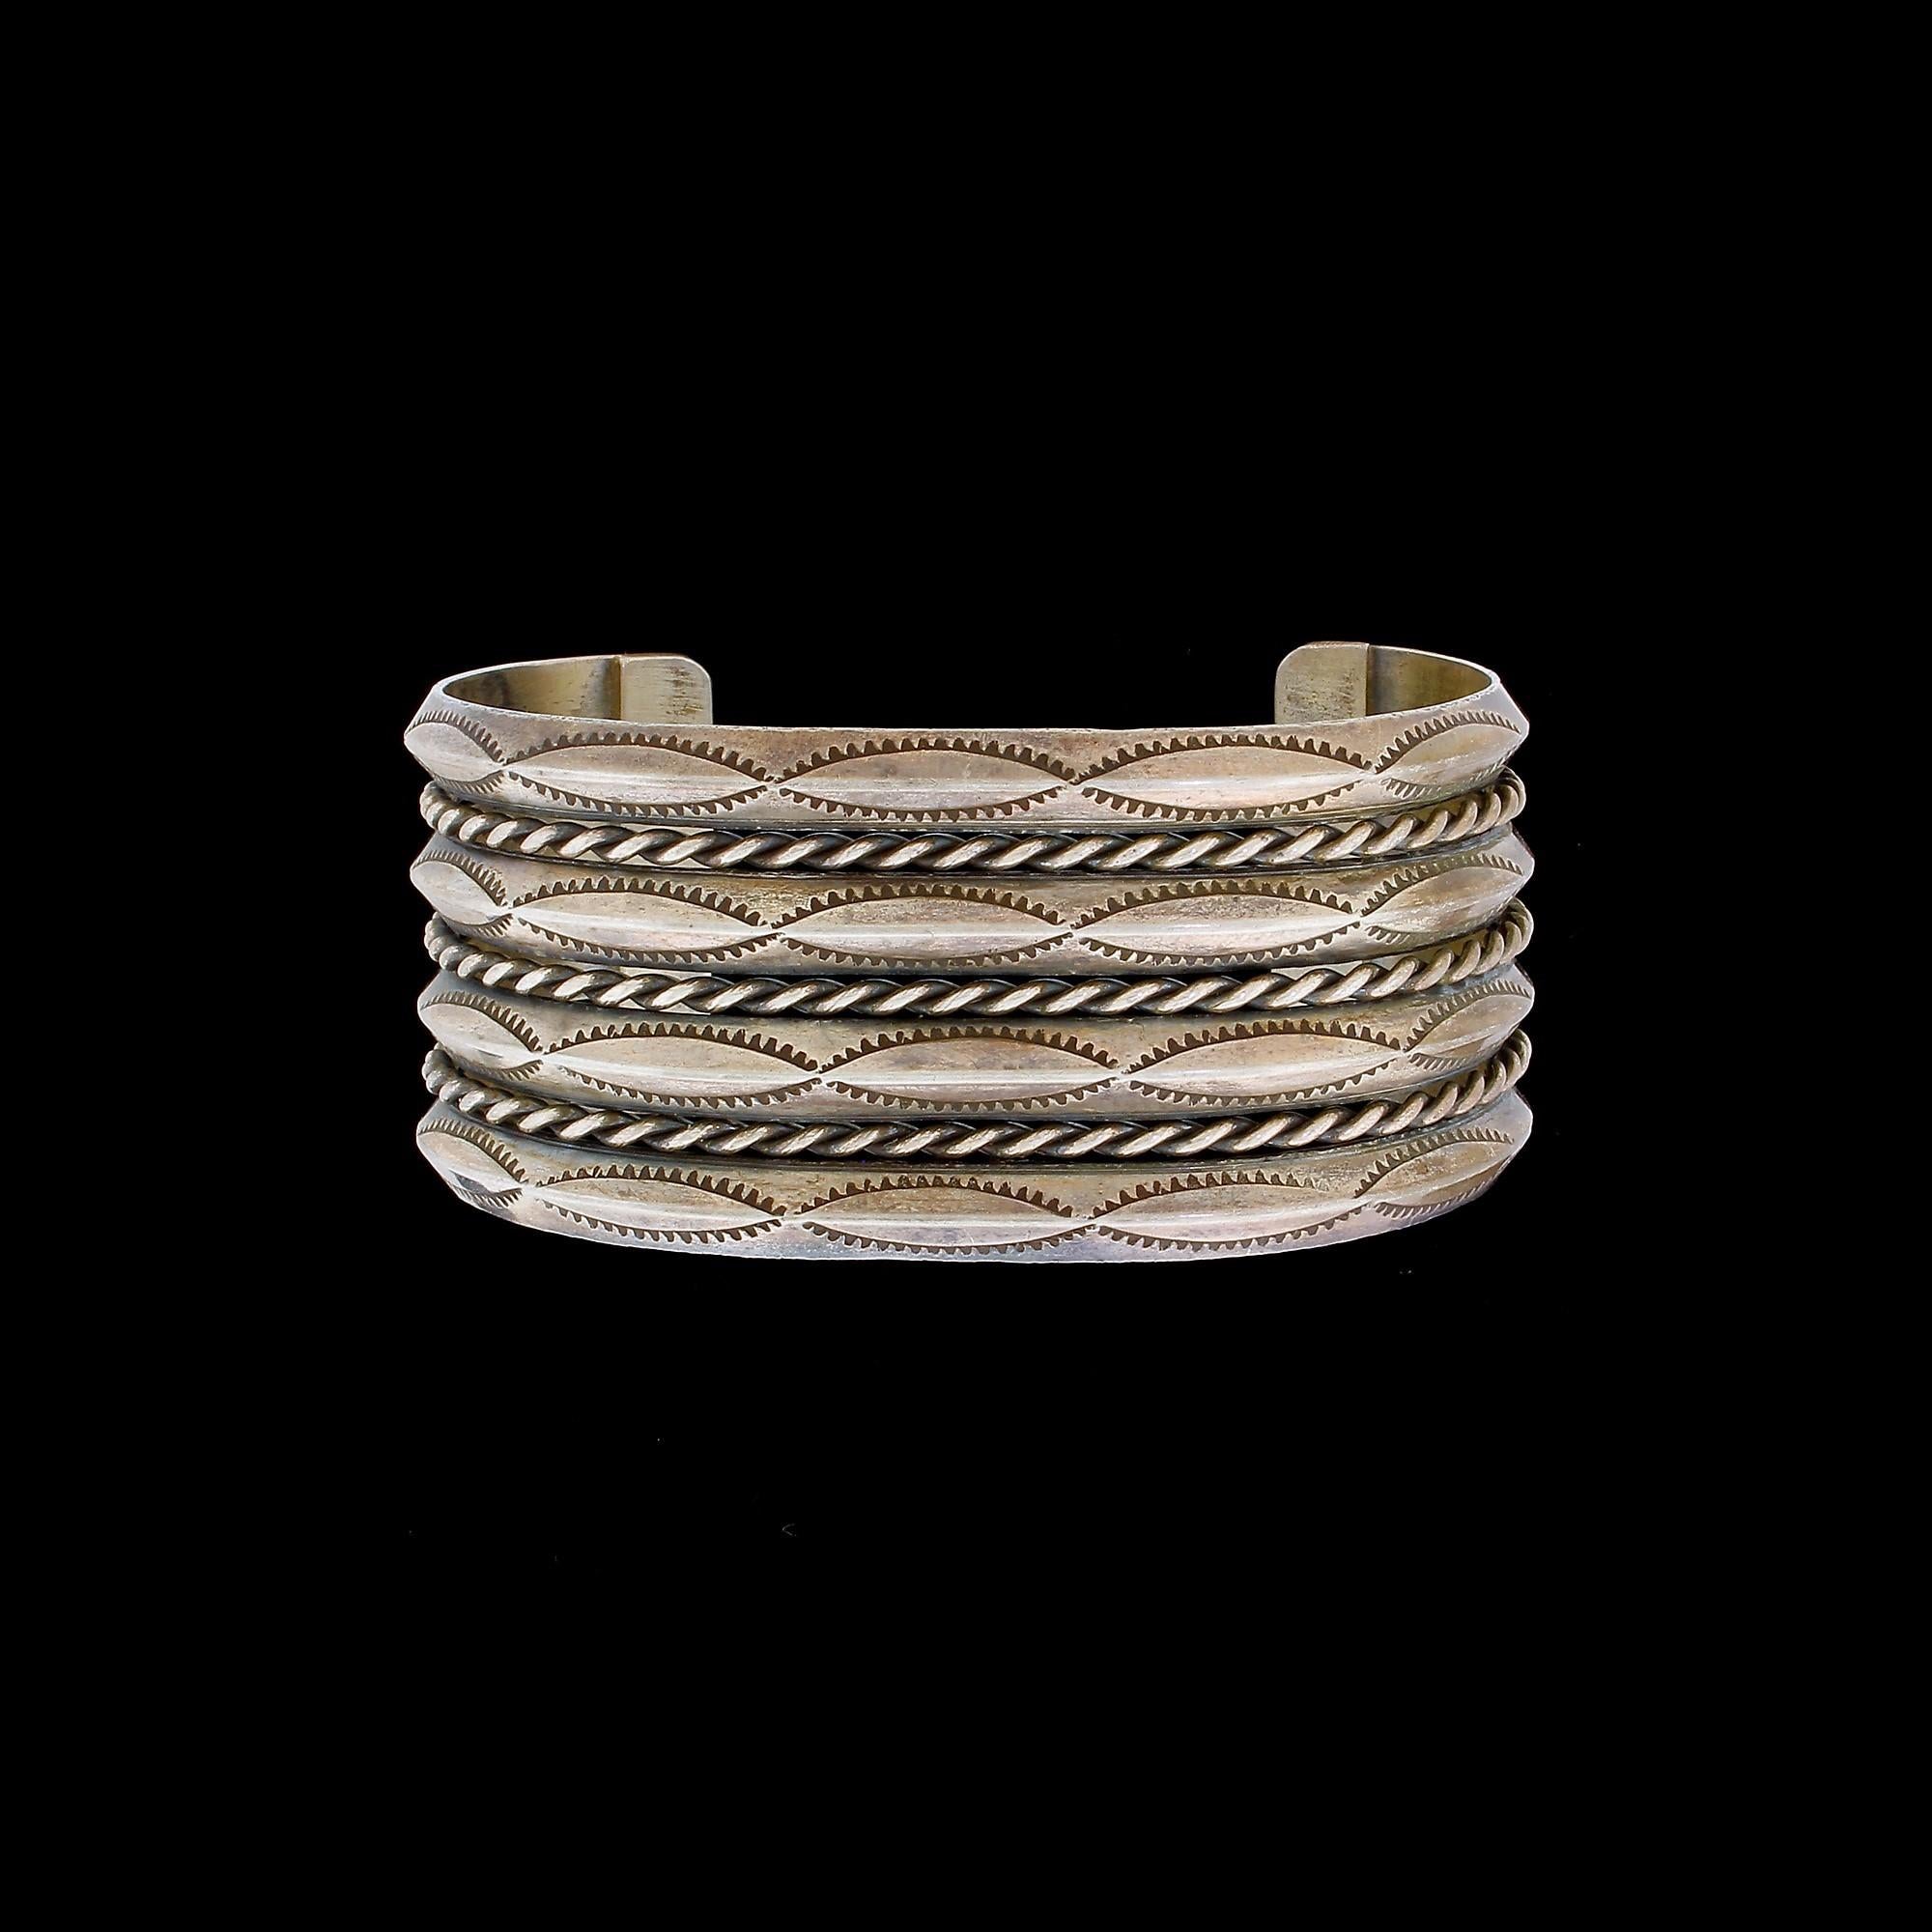 Native American Navajo Indian 900 coin silver hand-stamped 4-row cuff bracelet. This gorgeous wide silver cuff features 4 solid bands with stamp marks and a total of 3 twisted-design silver ropes, one between each band. A high quality unsigned